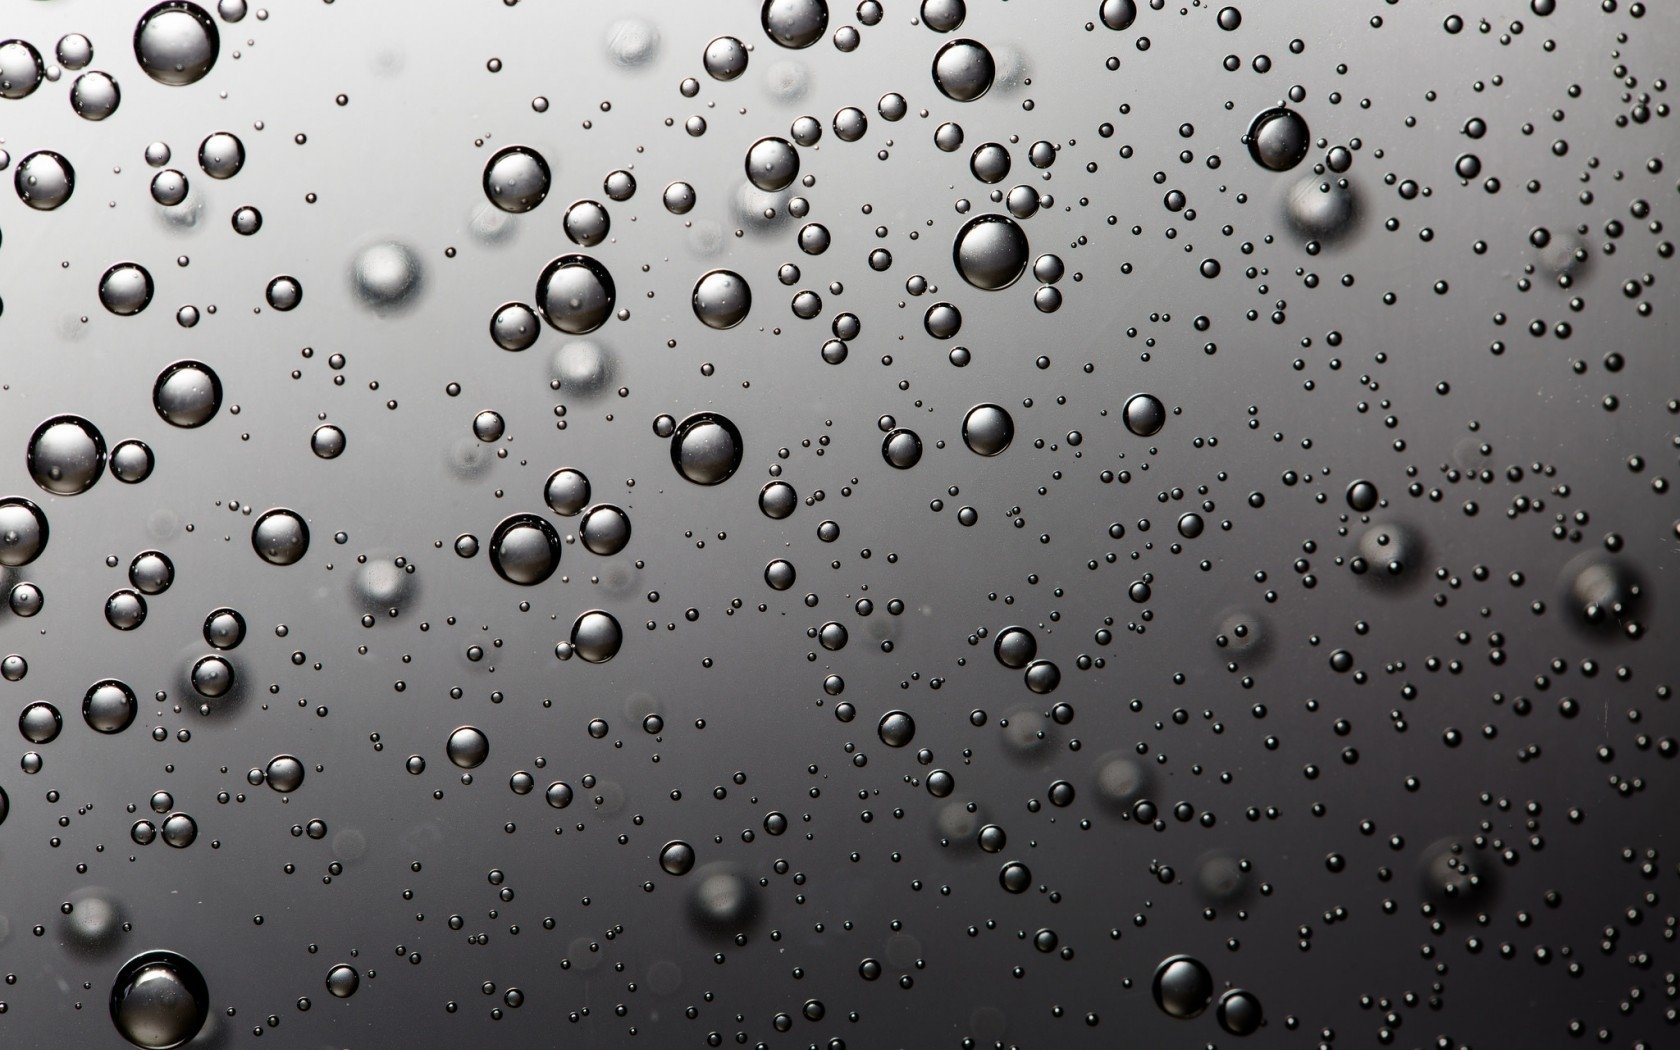 textures, Water, Bubbles Wallpapers HD / Desktop and Mobile Backgrounds